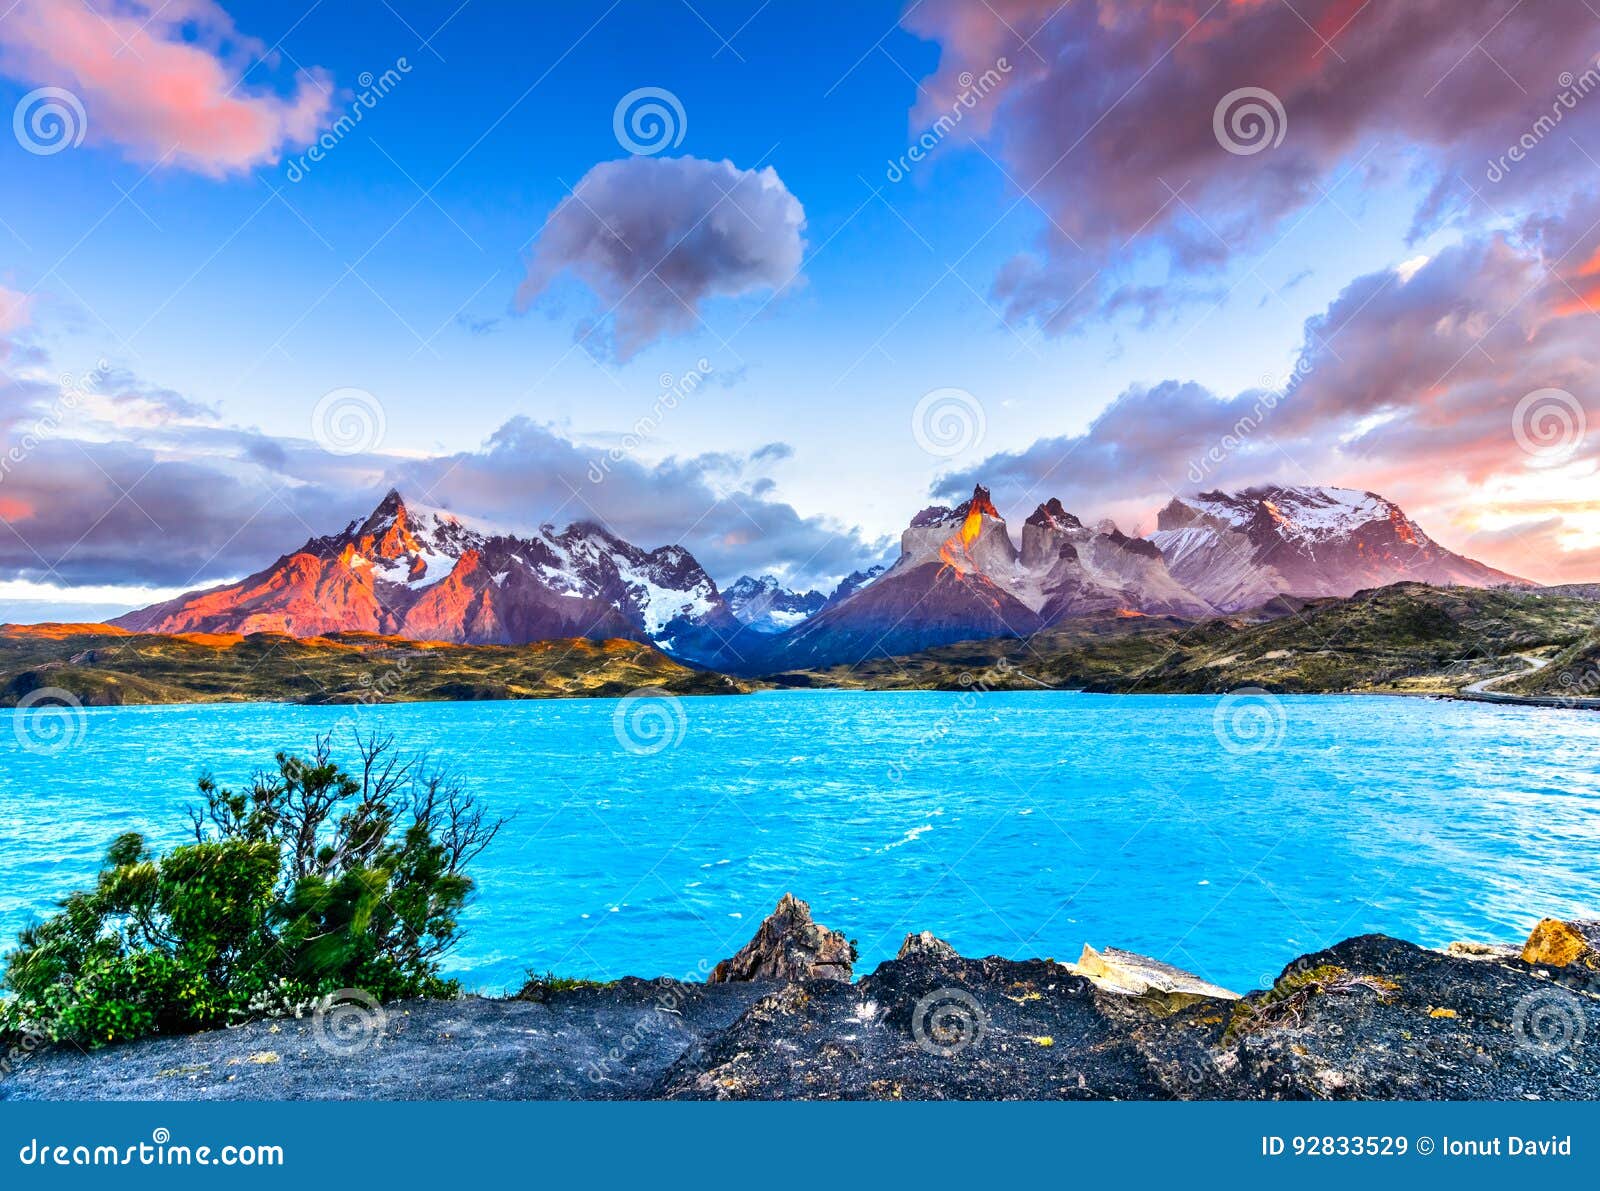 torres del paine,patagonia, chile - southern patagonian ice field, magellanes region of south america